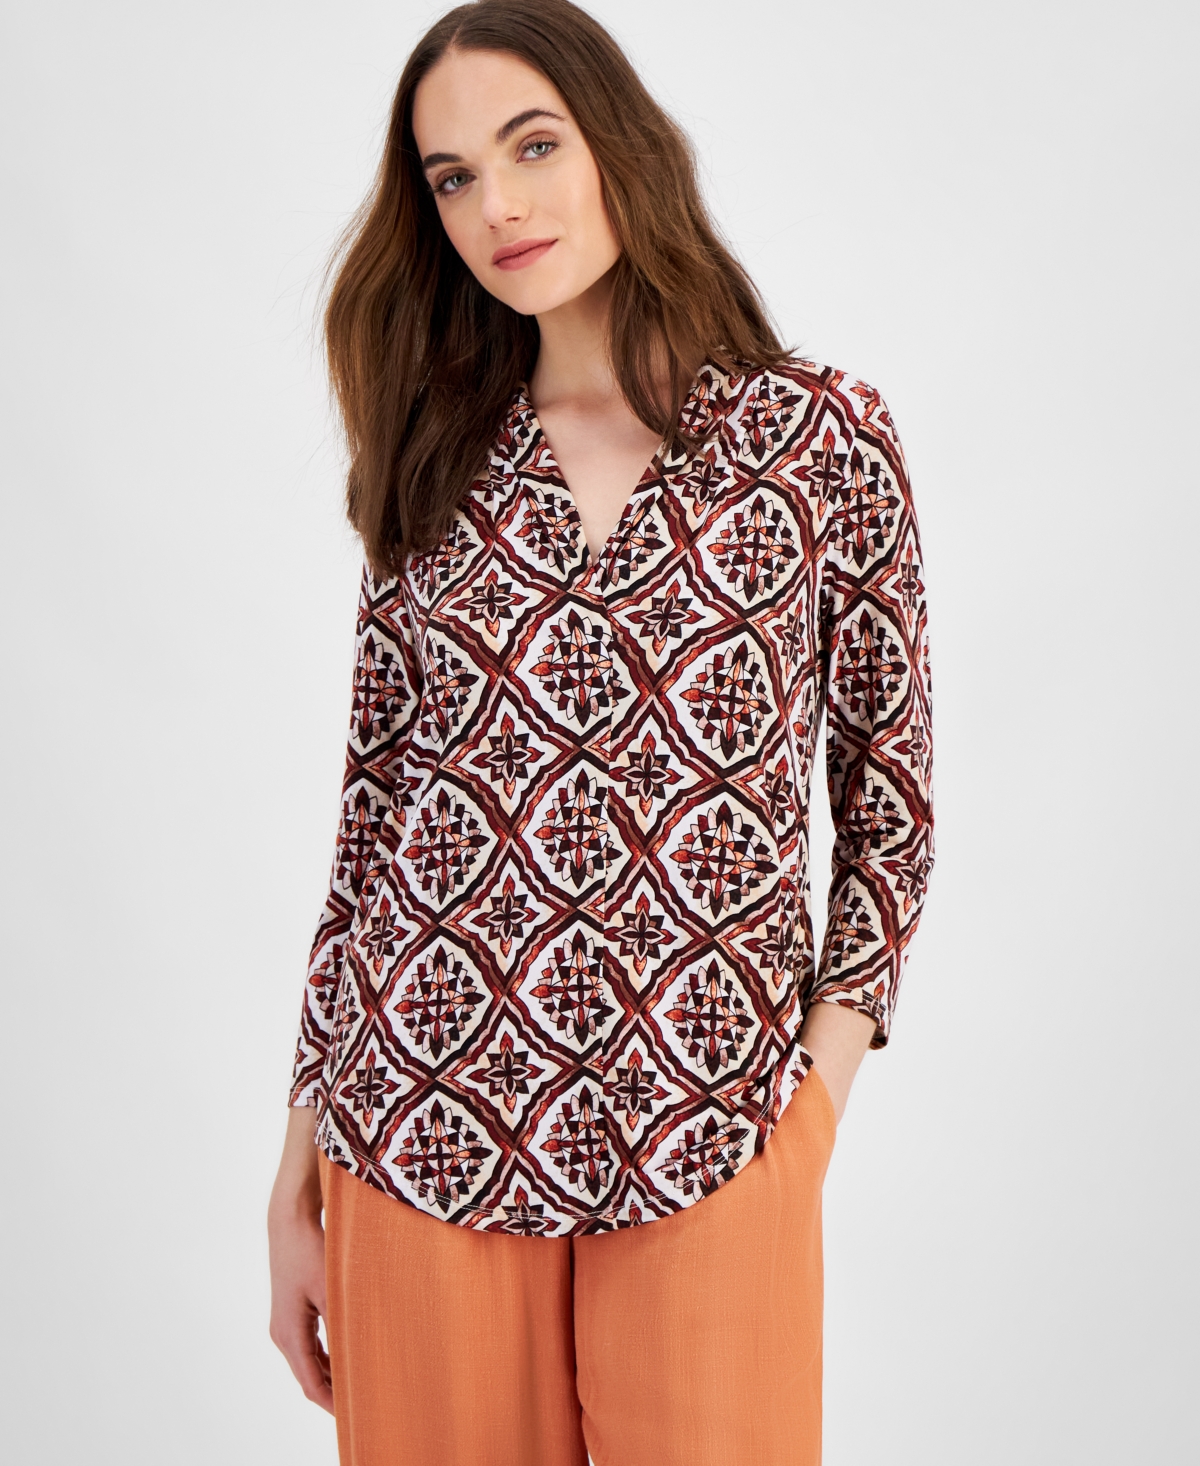 Women's V-Neck Printed 3/4-Sleeve Top, Created for Macy's - Firewood Combo